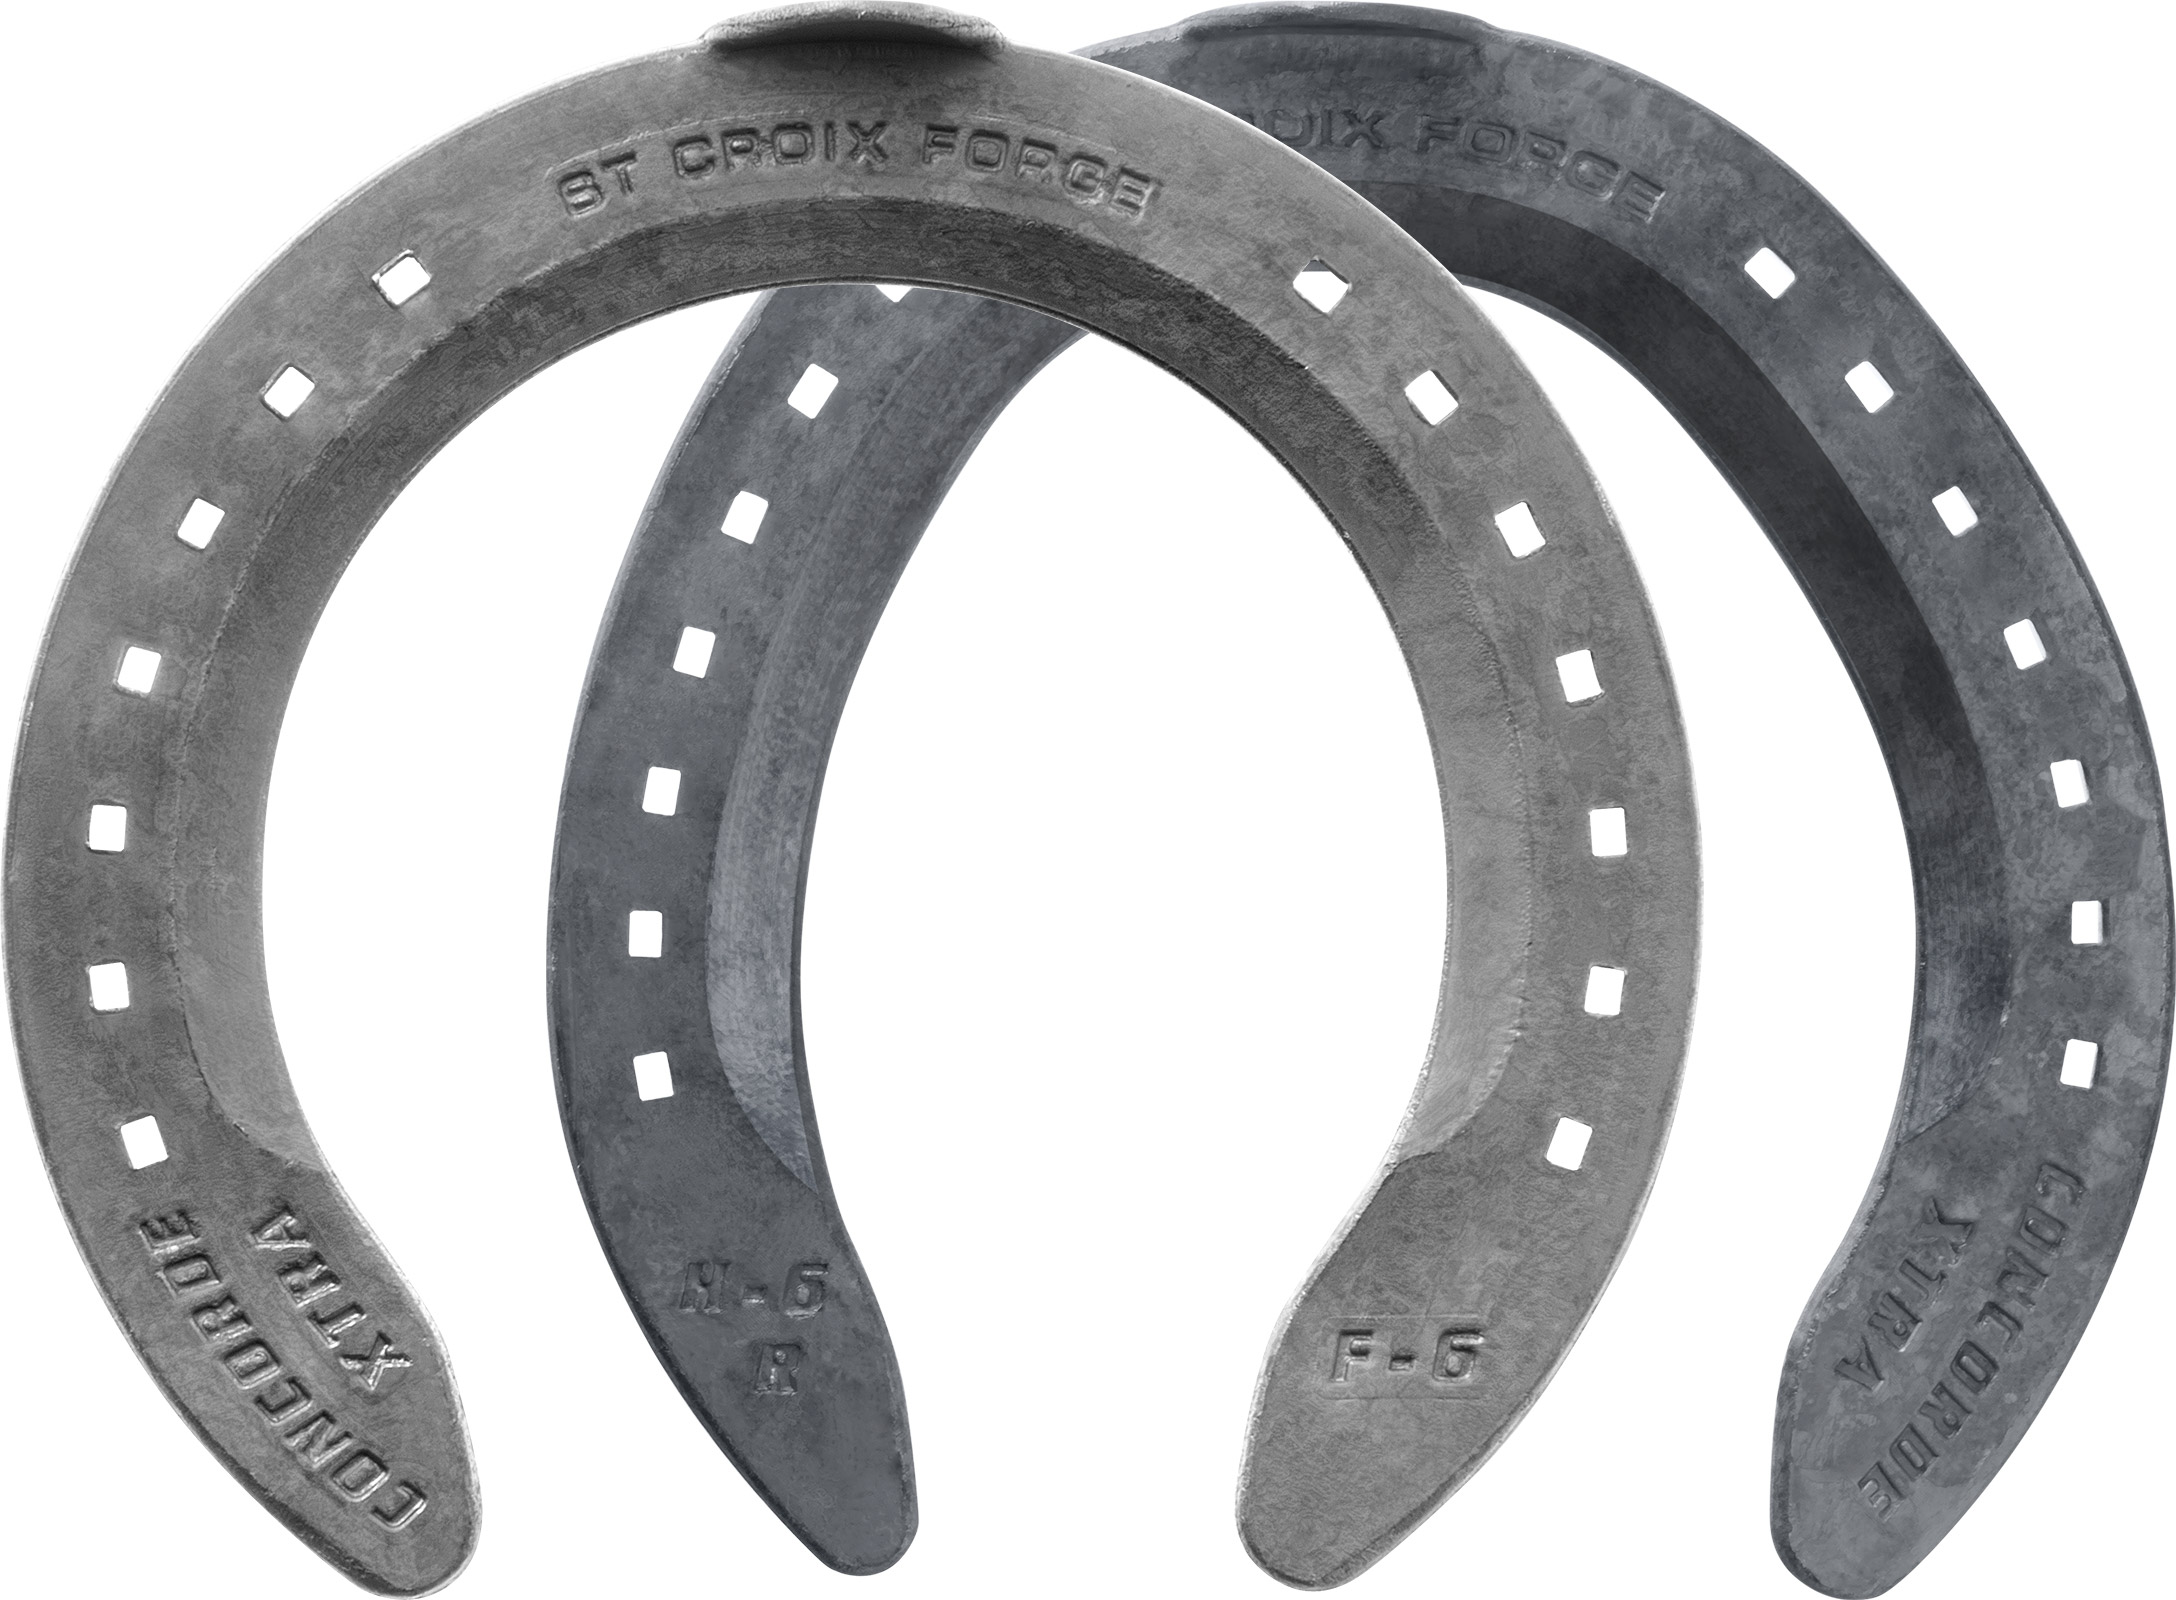 St. Croix Concorde Extra Steel horseshoes, front and hind, hoof side view